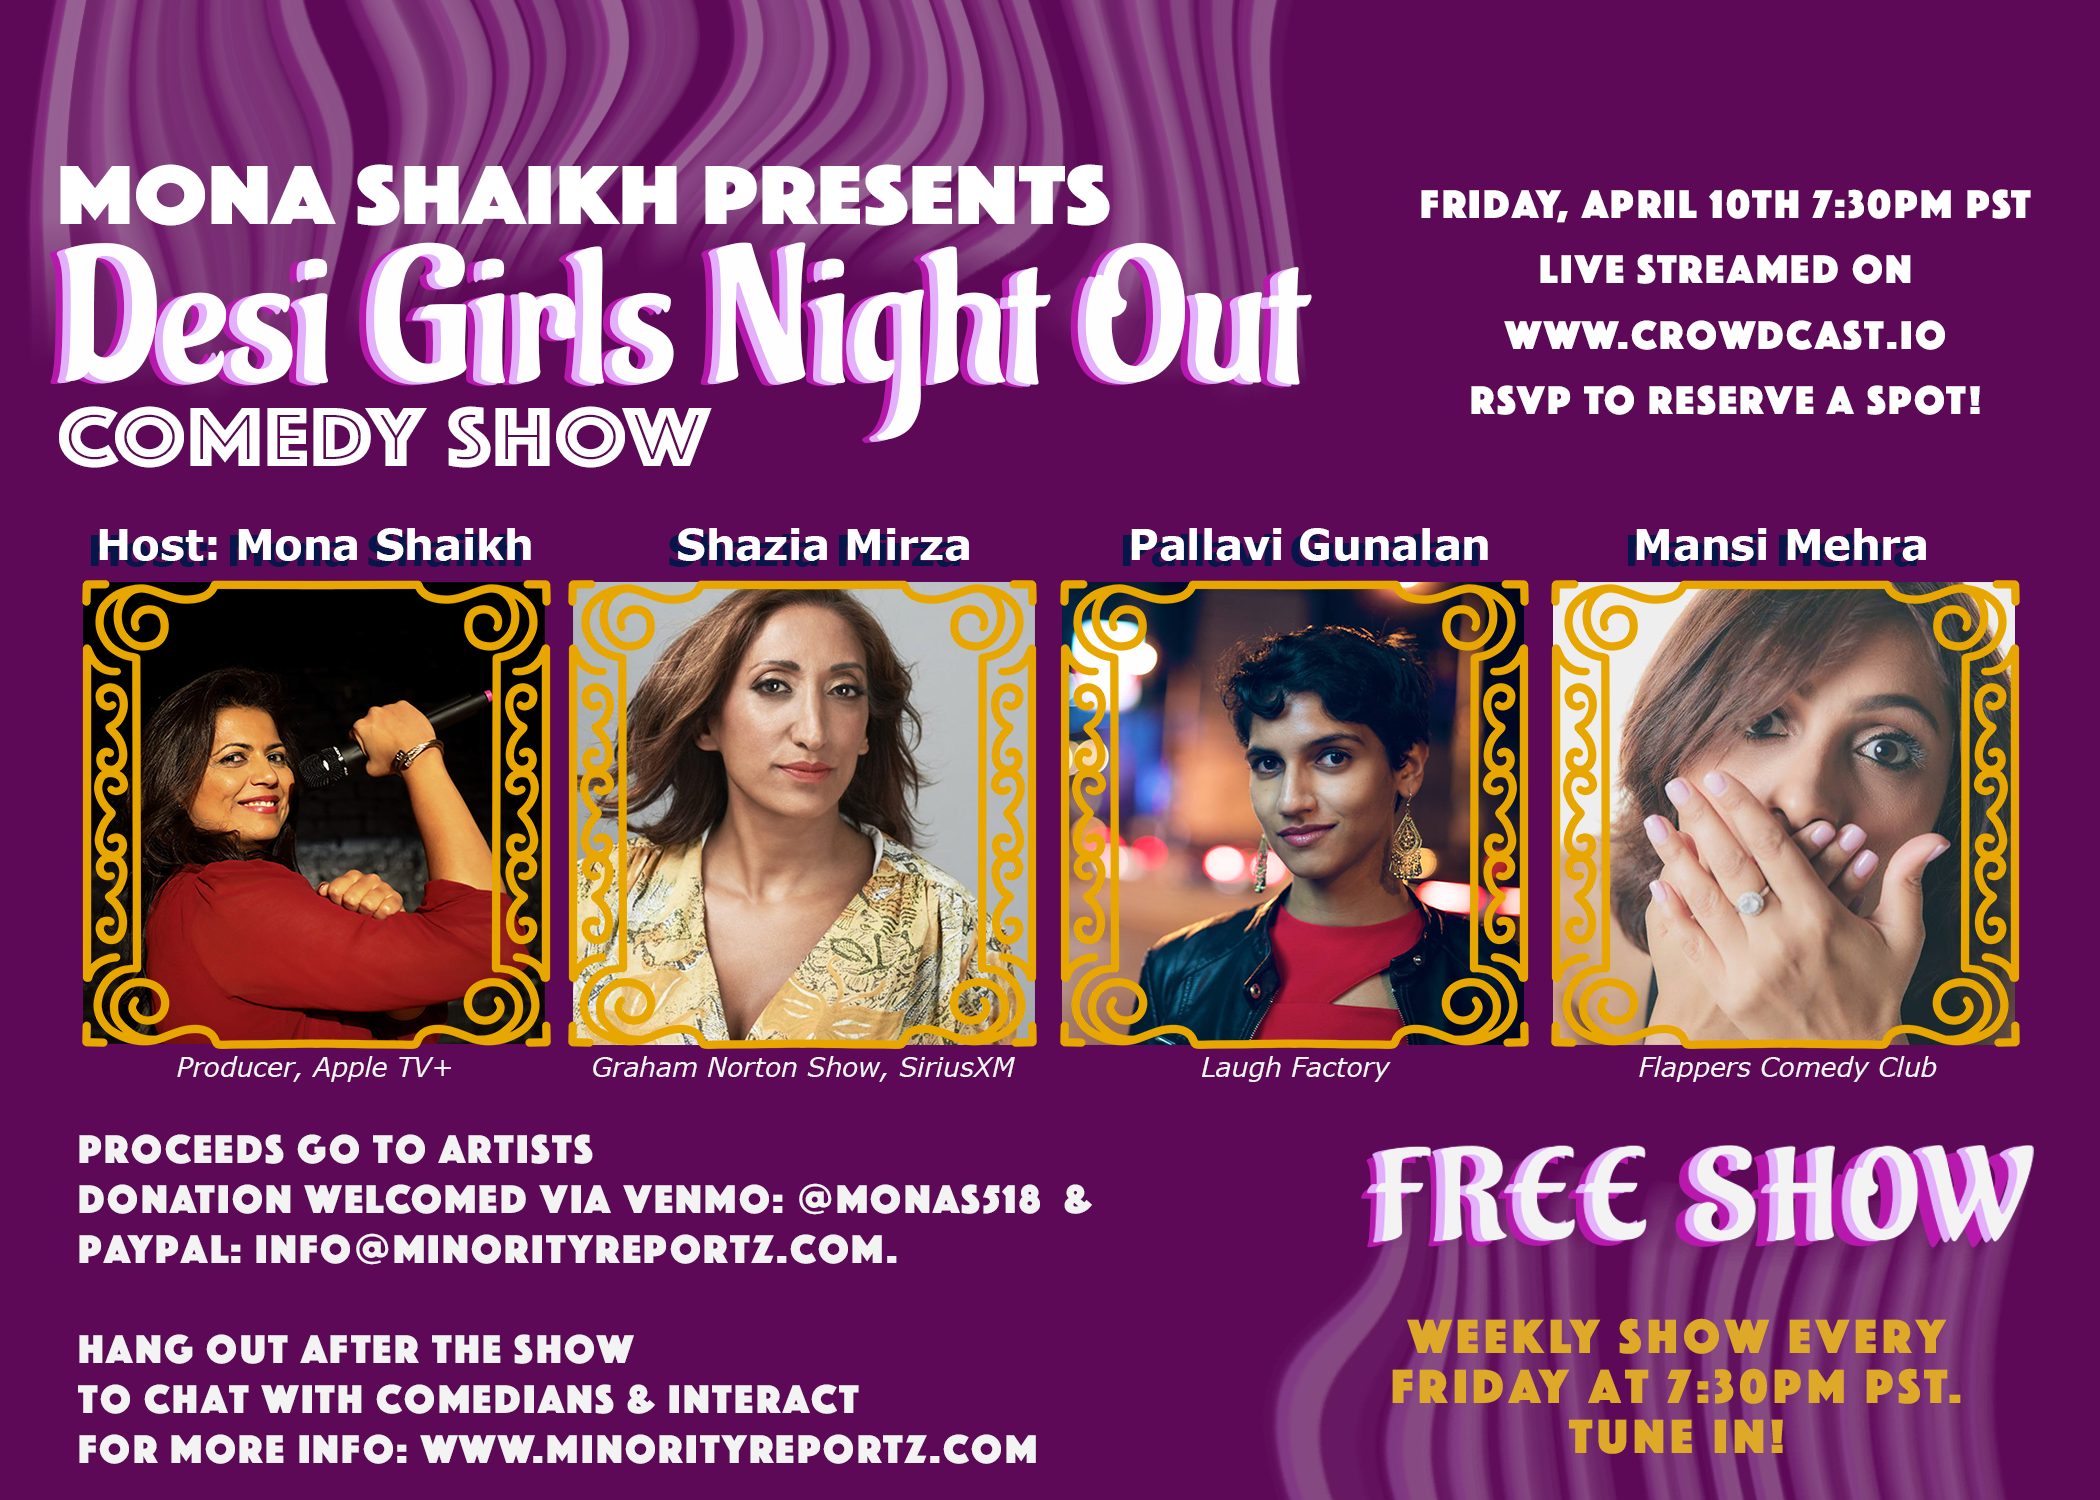 MONA SHAIKH presents DESI GIRLS NIGHT OUT COMEDY SHOW WITH HOST MONA SHAIKH (Producer, Apple TV+), SHAZIA MIRZA (Graham Norton Show), PALLAVI GUNALAN (Laugh Factory), MANSI MEHRA (Flappers Comedy Club). FOLLOWED BY A VIRTUAL HANGOUT WITH COMEDIANS.